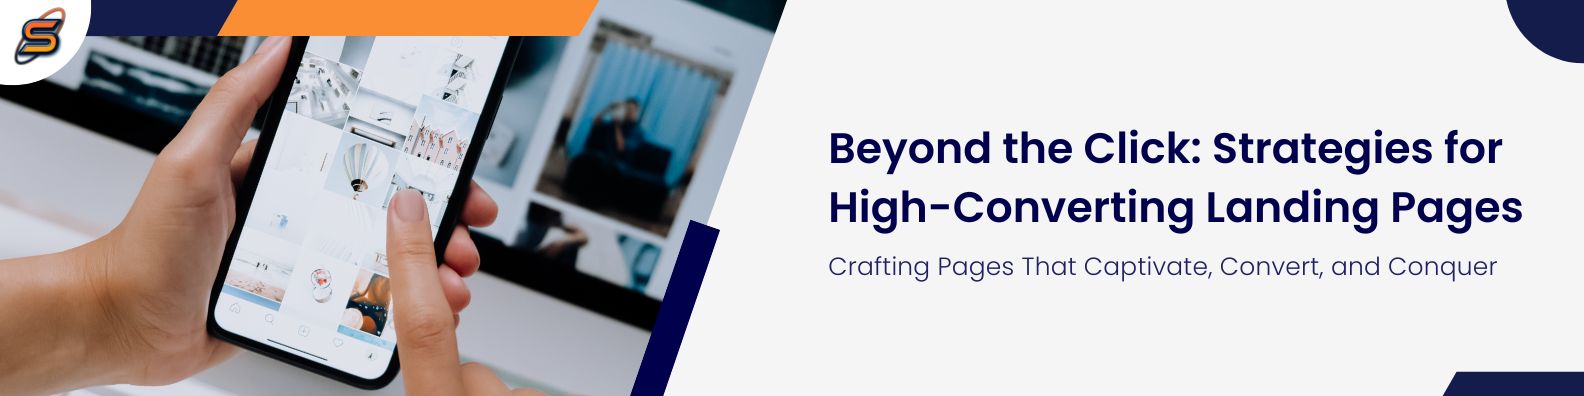 Beyond the Click: Strategies for High-Converting Landing Pages